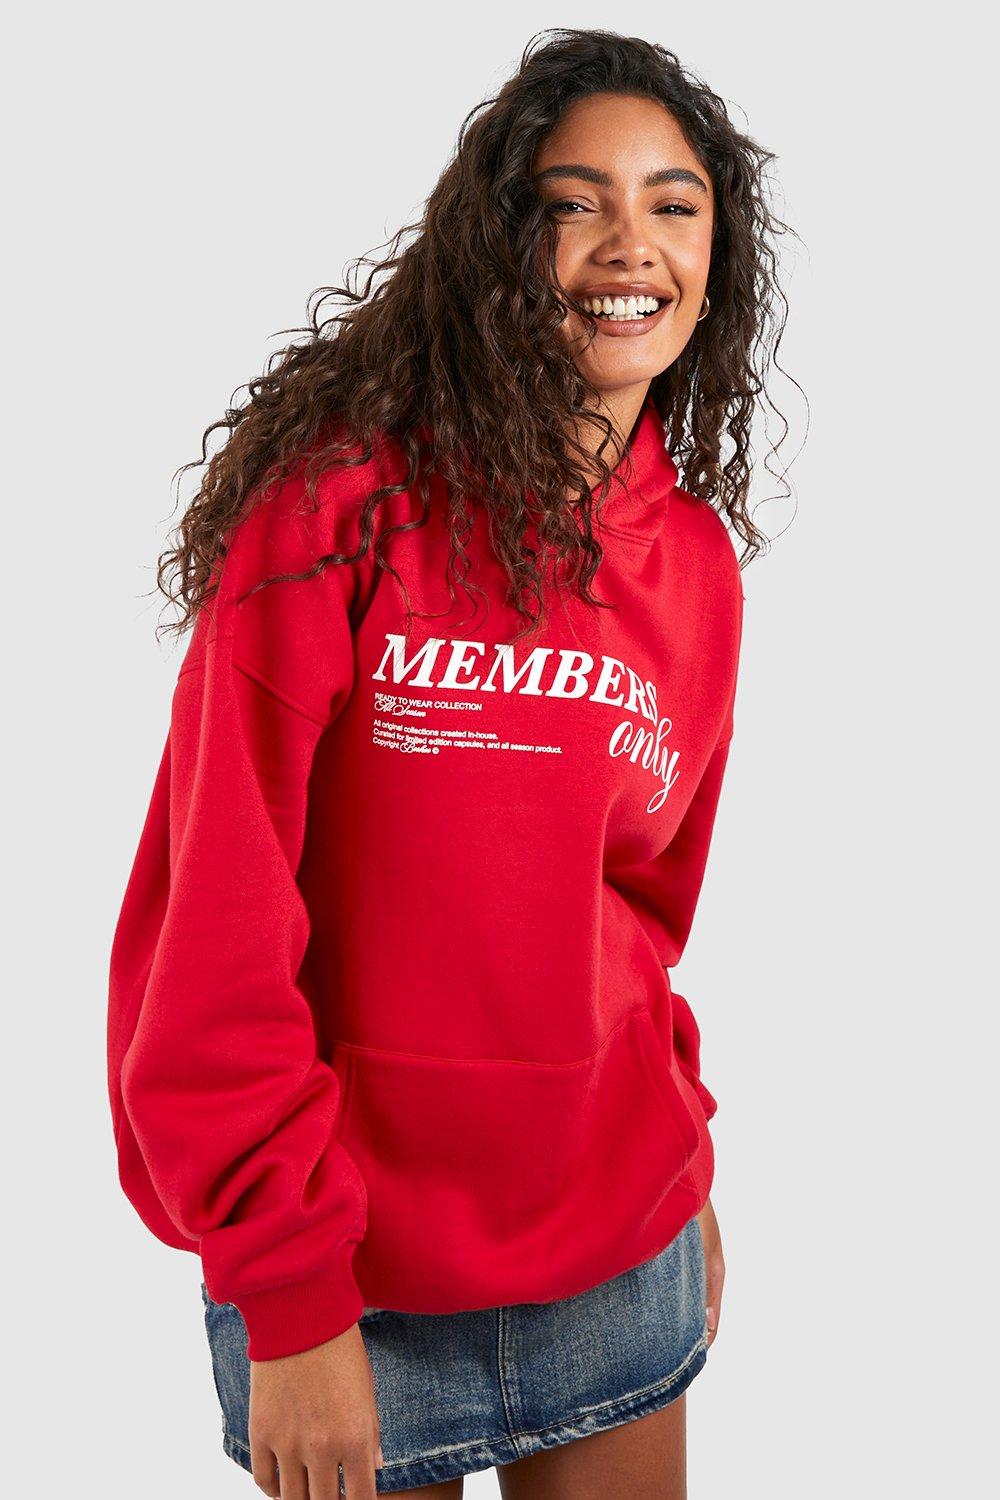 womens tall members only slogan hoodie - red - l, red